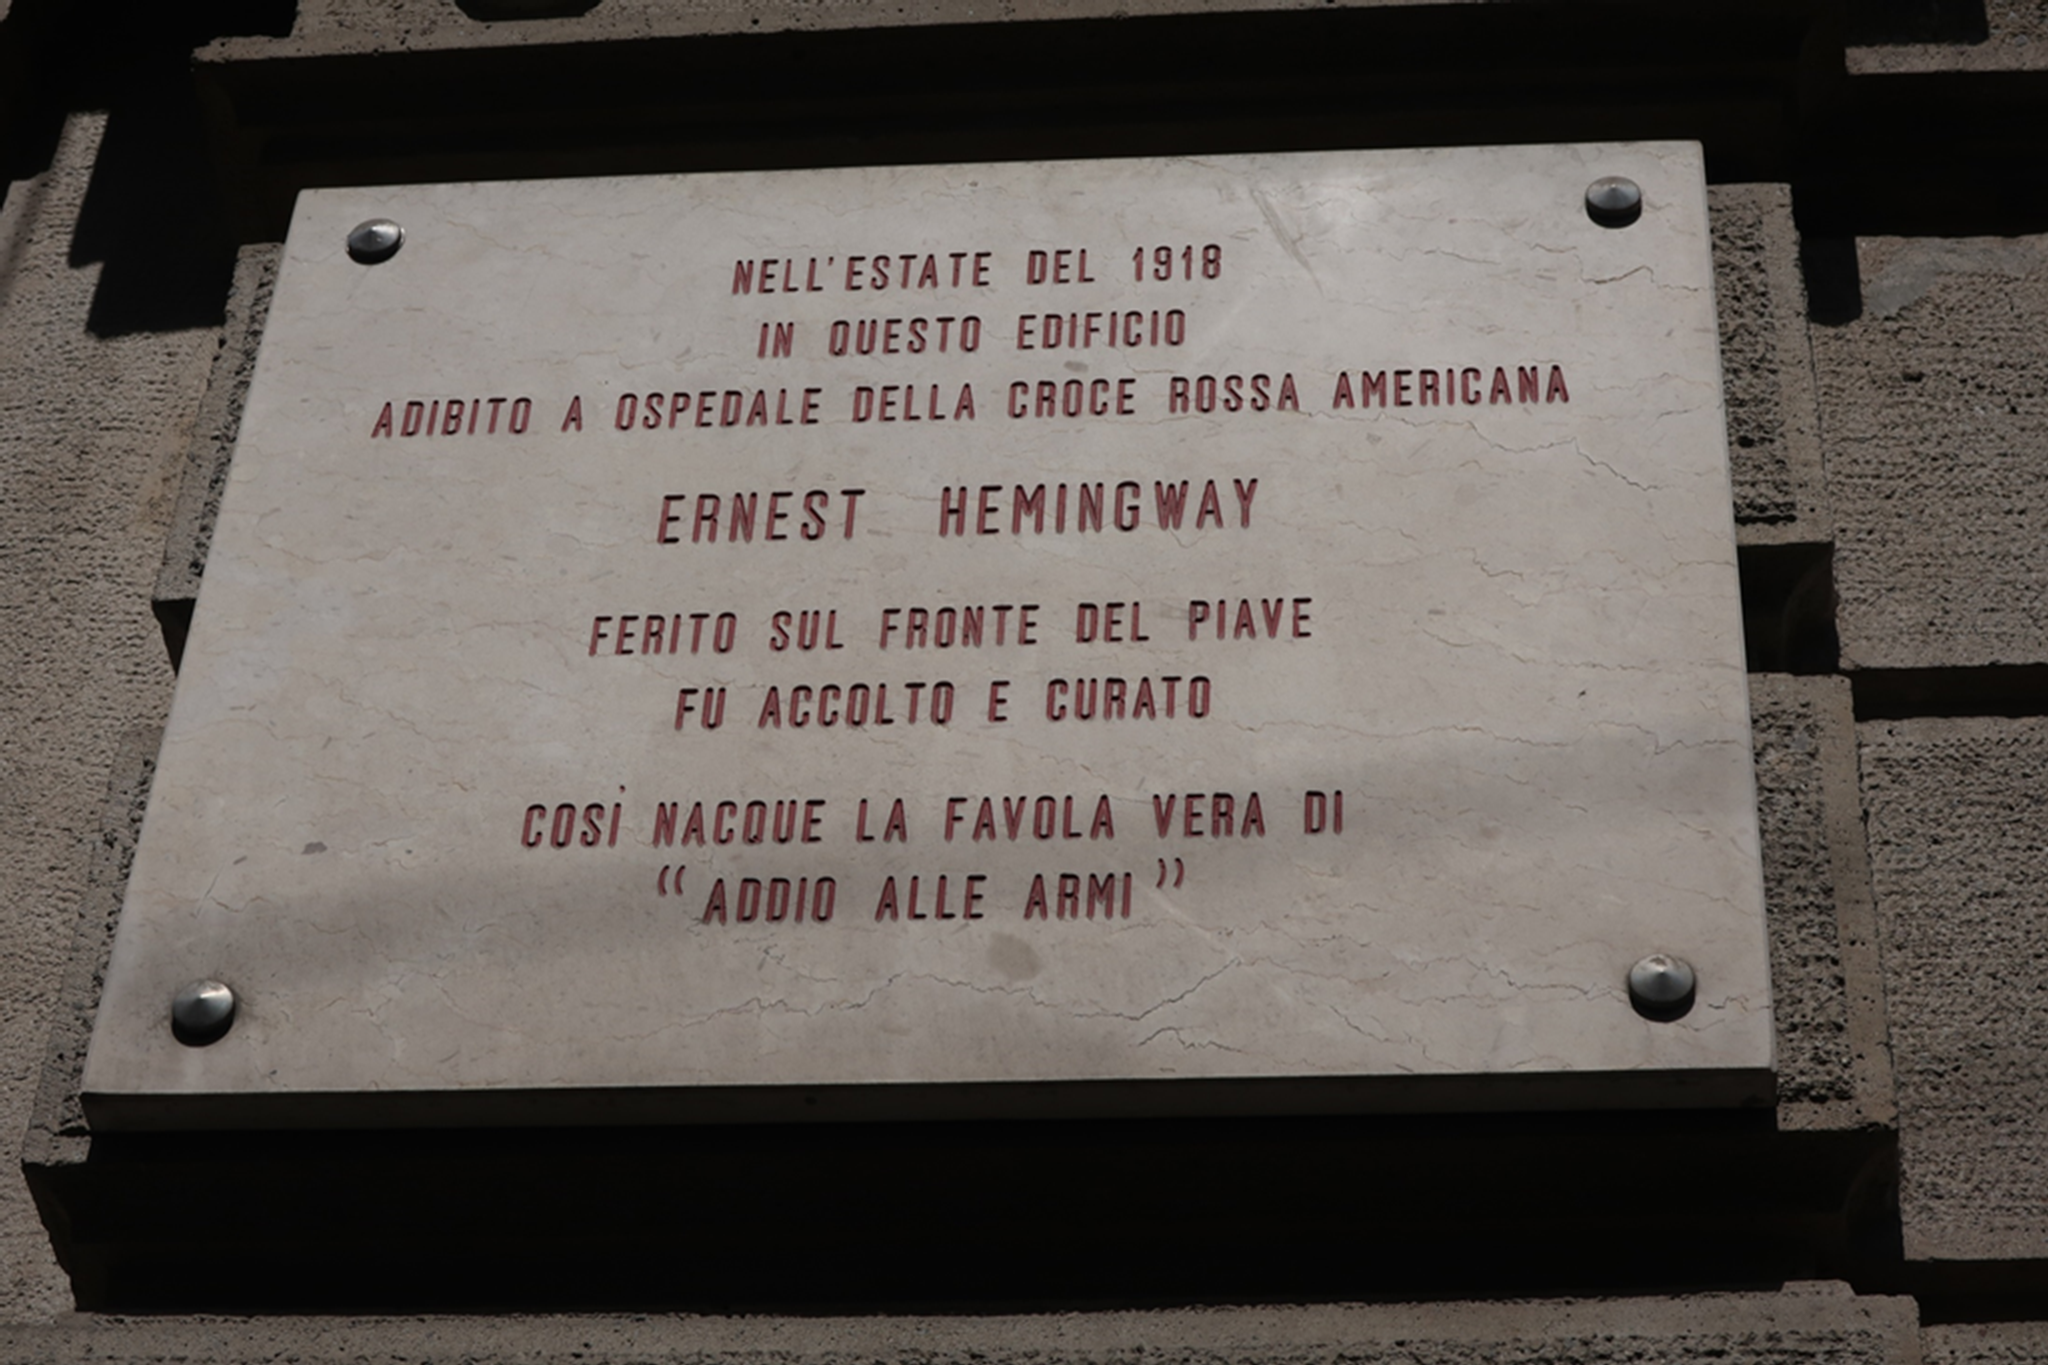 A plaque with ERNEST HEMINGWAY's name engraved on it